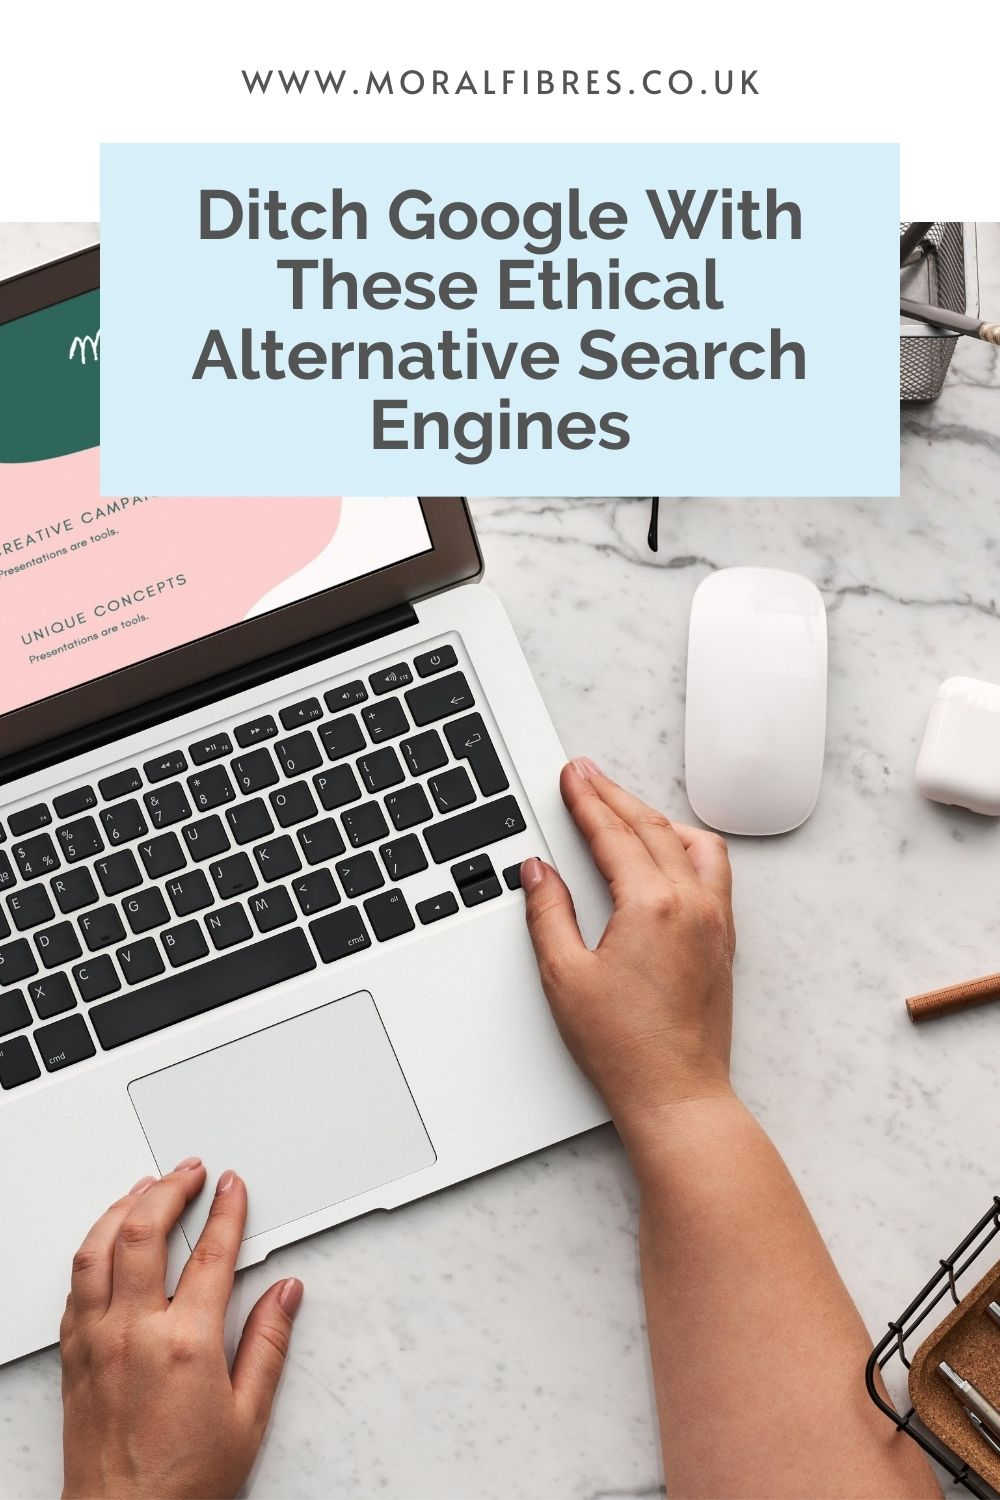 Person at computer, with a blue text box that says ditch google with these ethical alternative search engines.